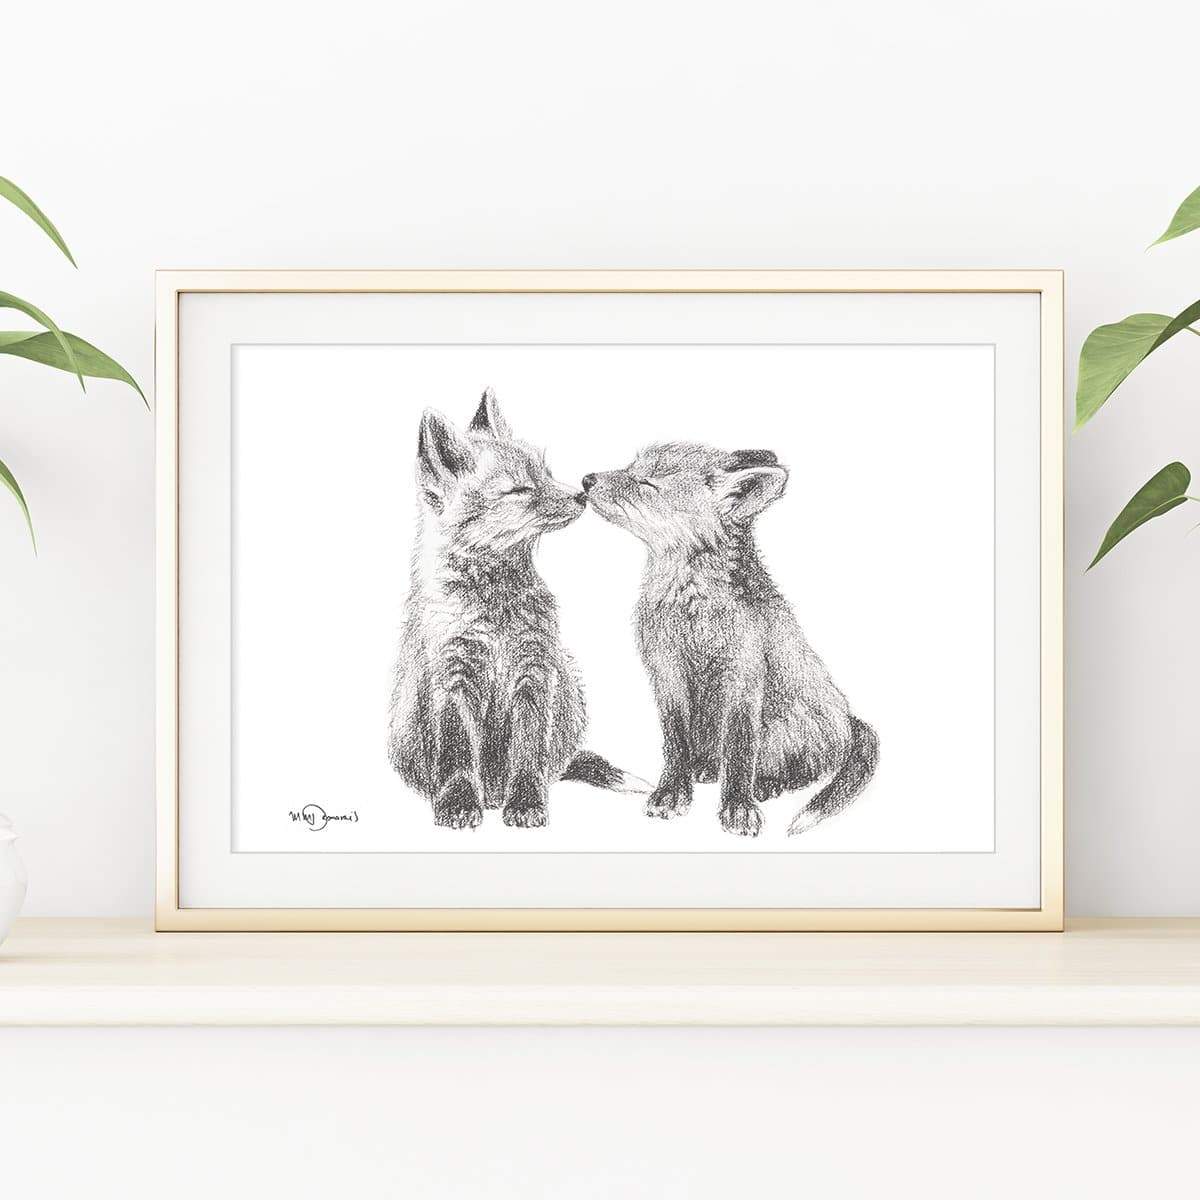 Adorable Baby Foxes - LE NID atelier